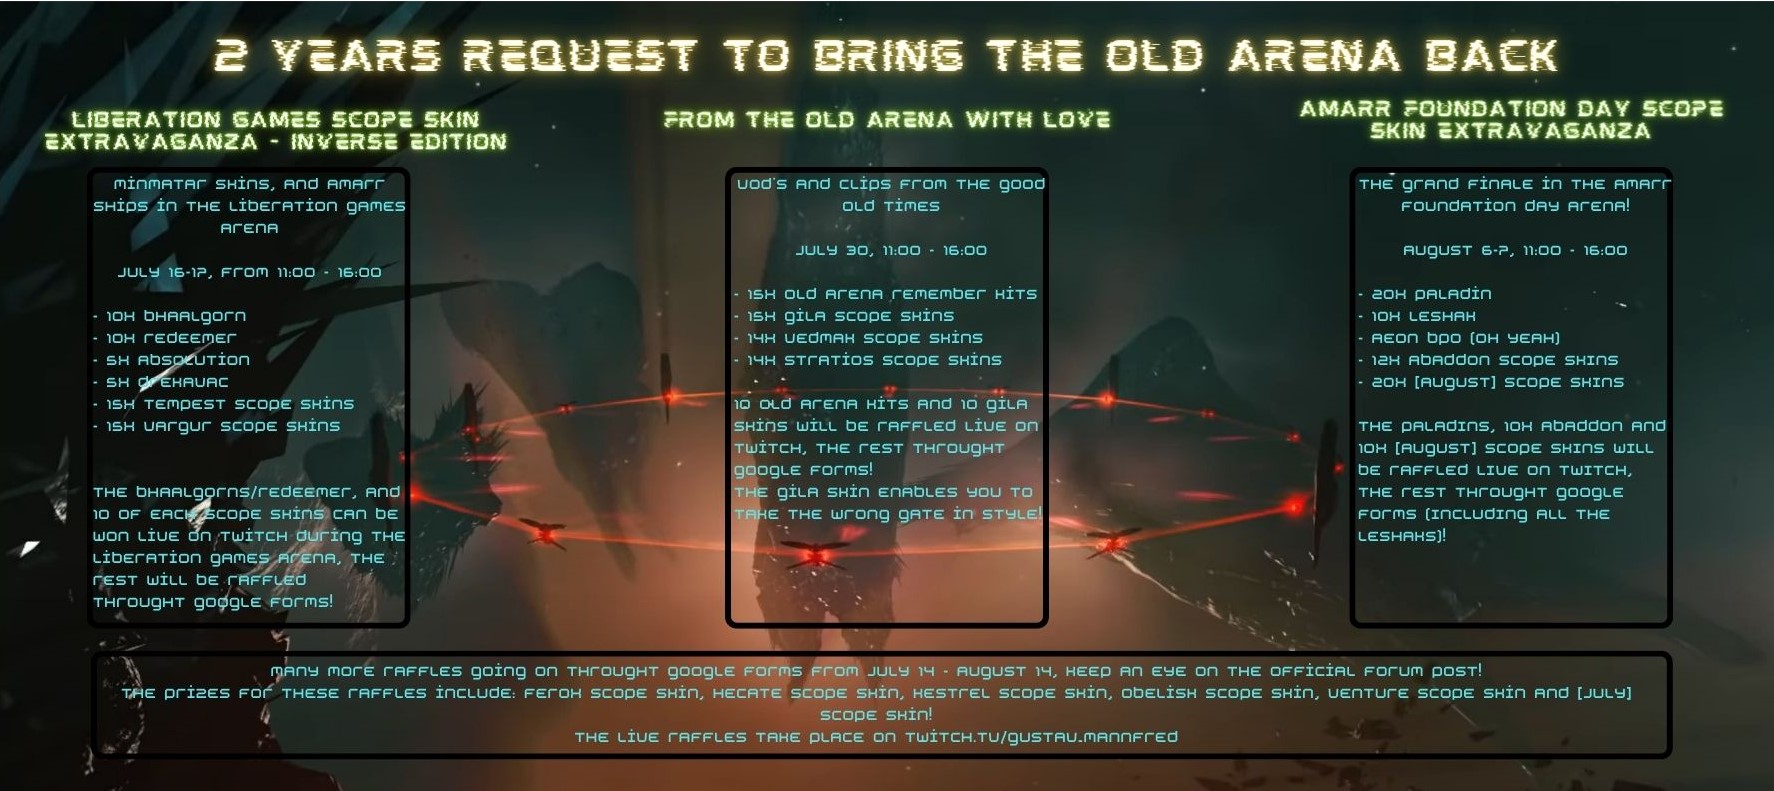 2 Years request to bring the old arena back update